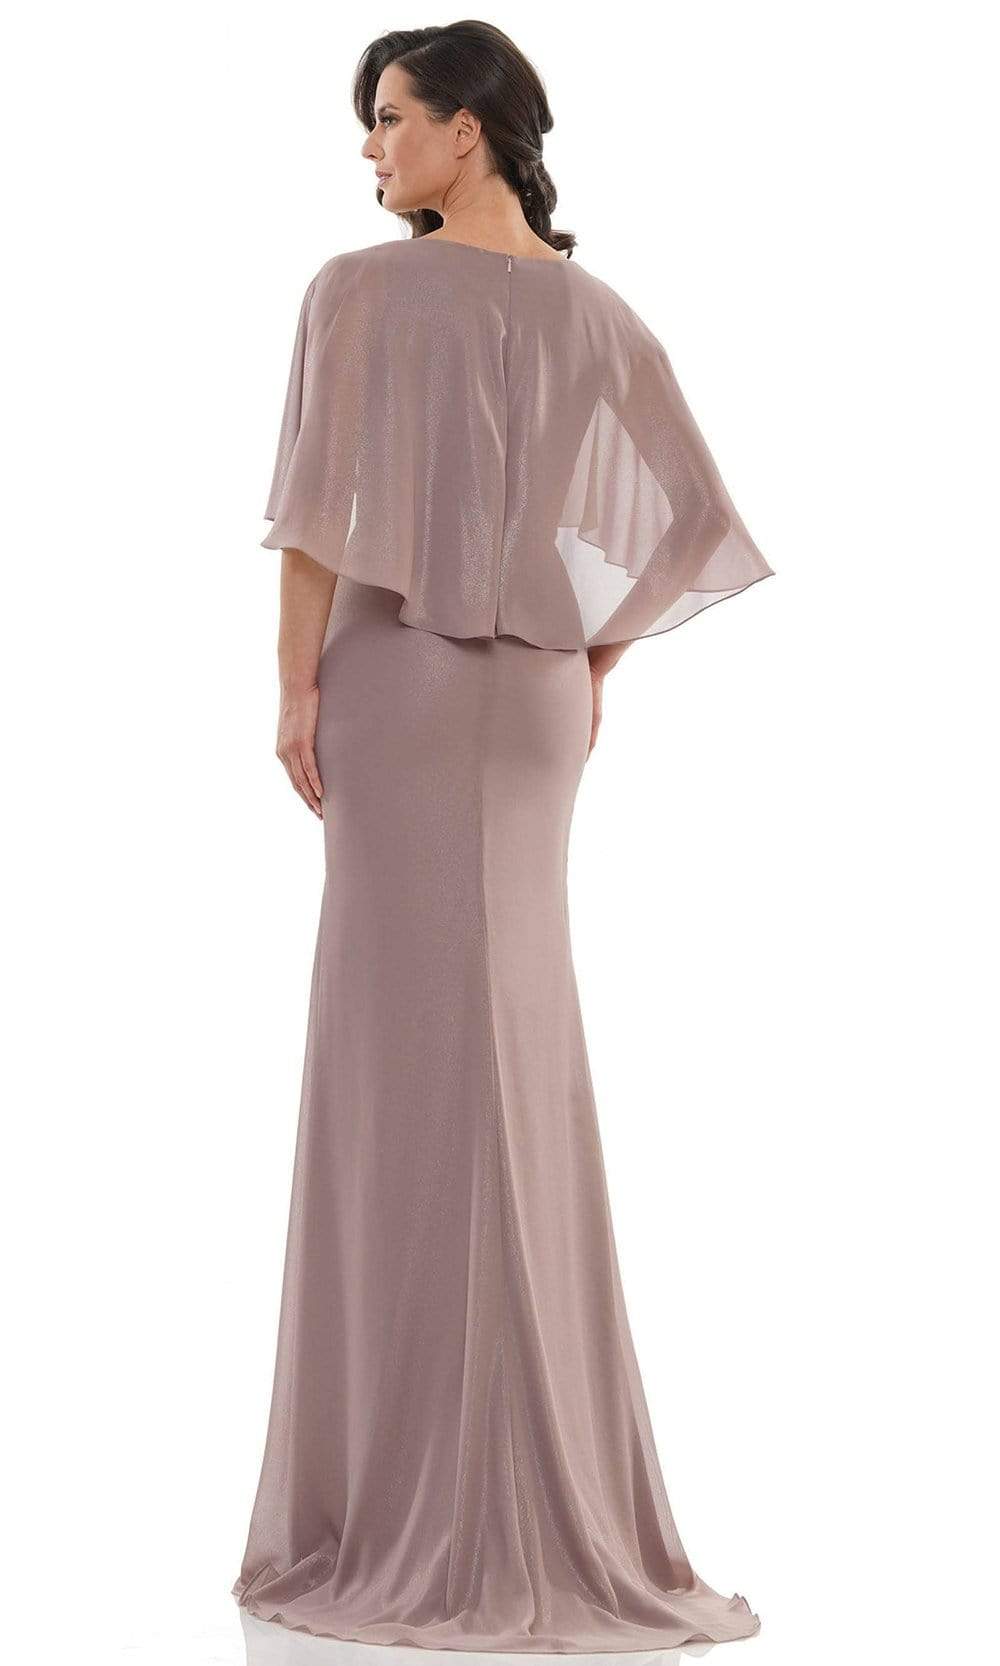 Marsoni by Colors - MV1130 Glittered Fabric Poncho Sheath Gown Mother of the Bride Dresses